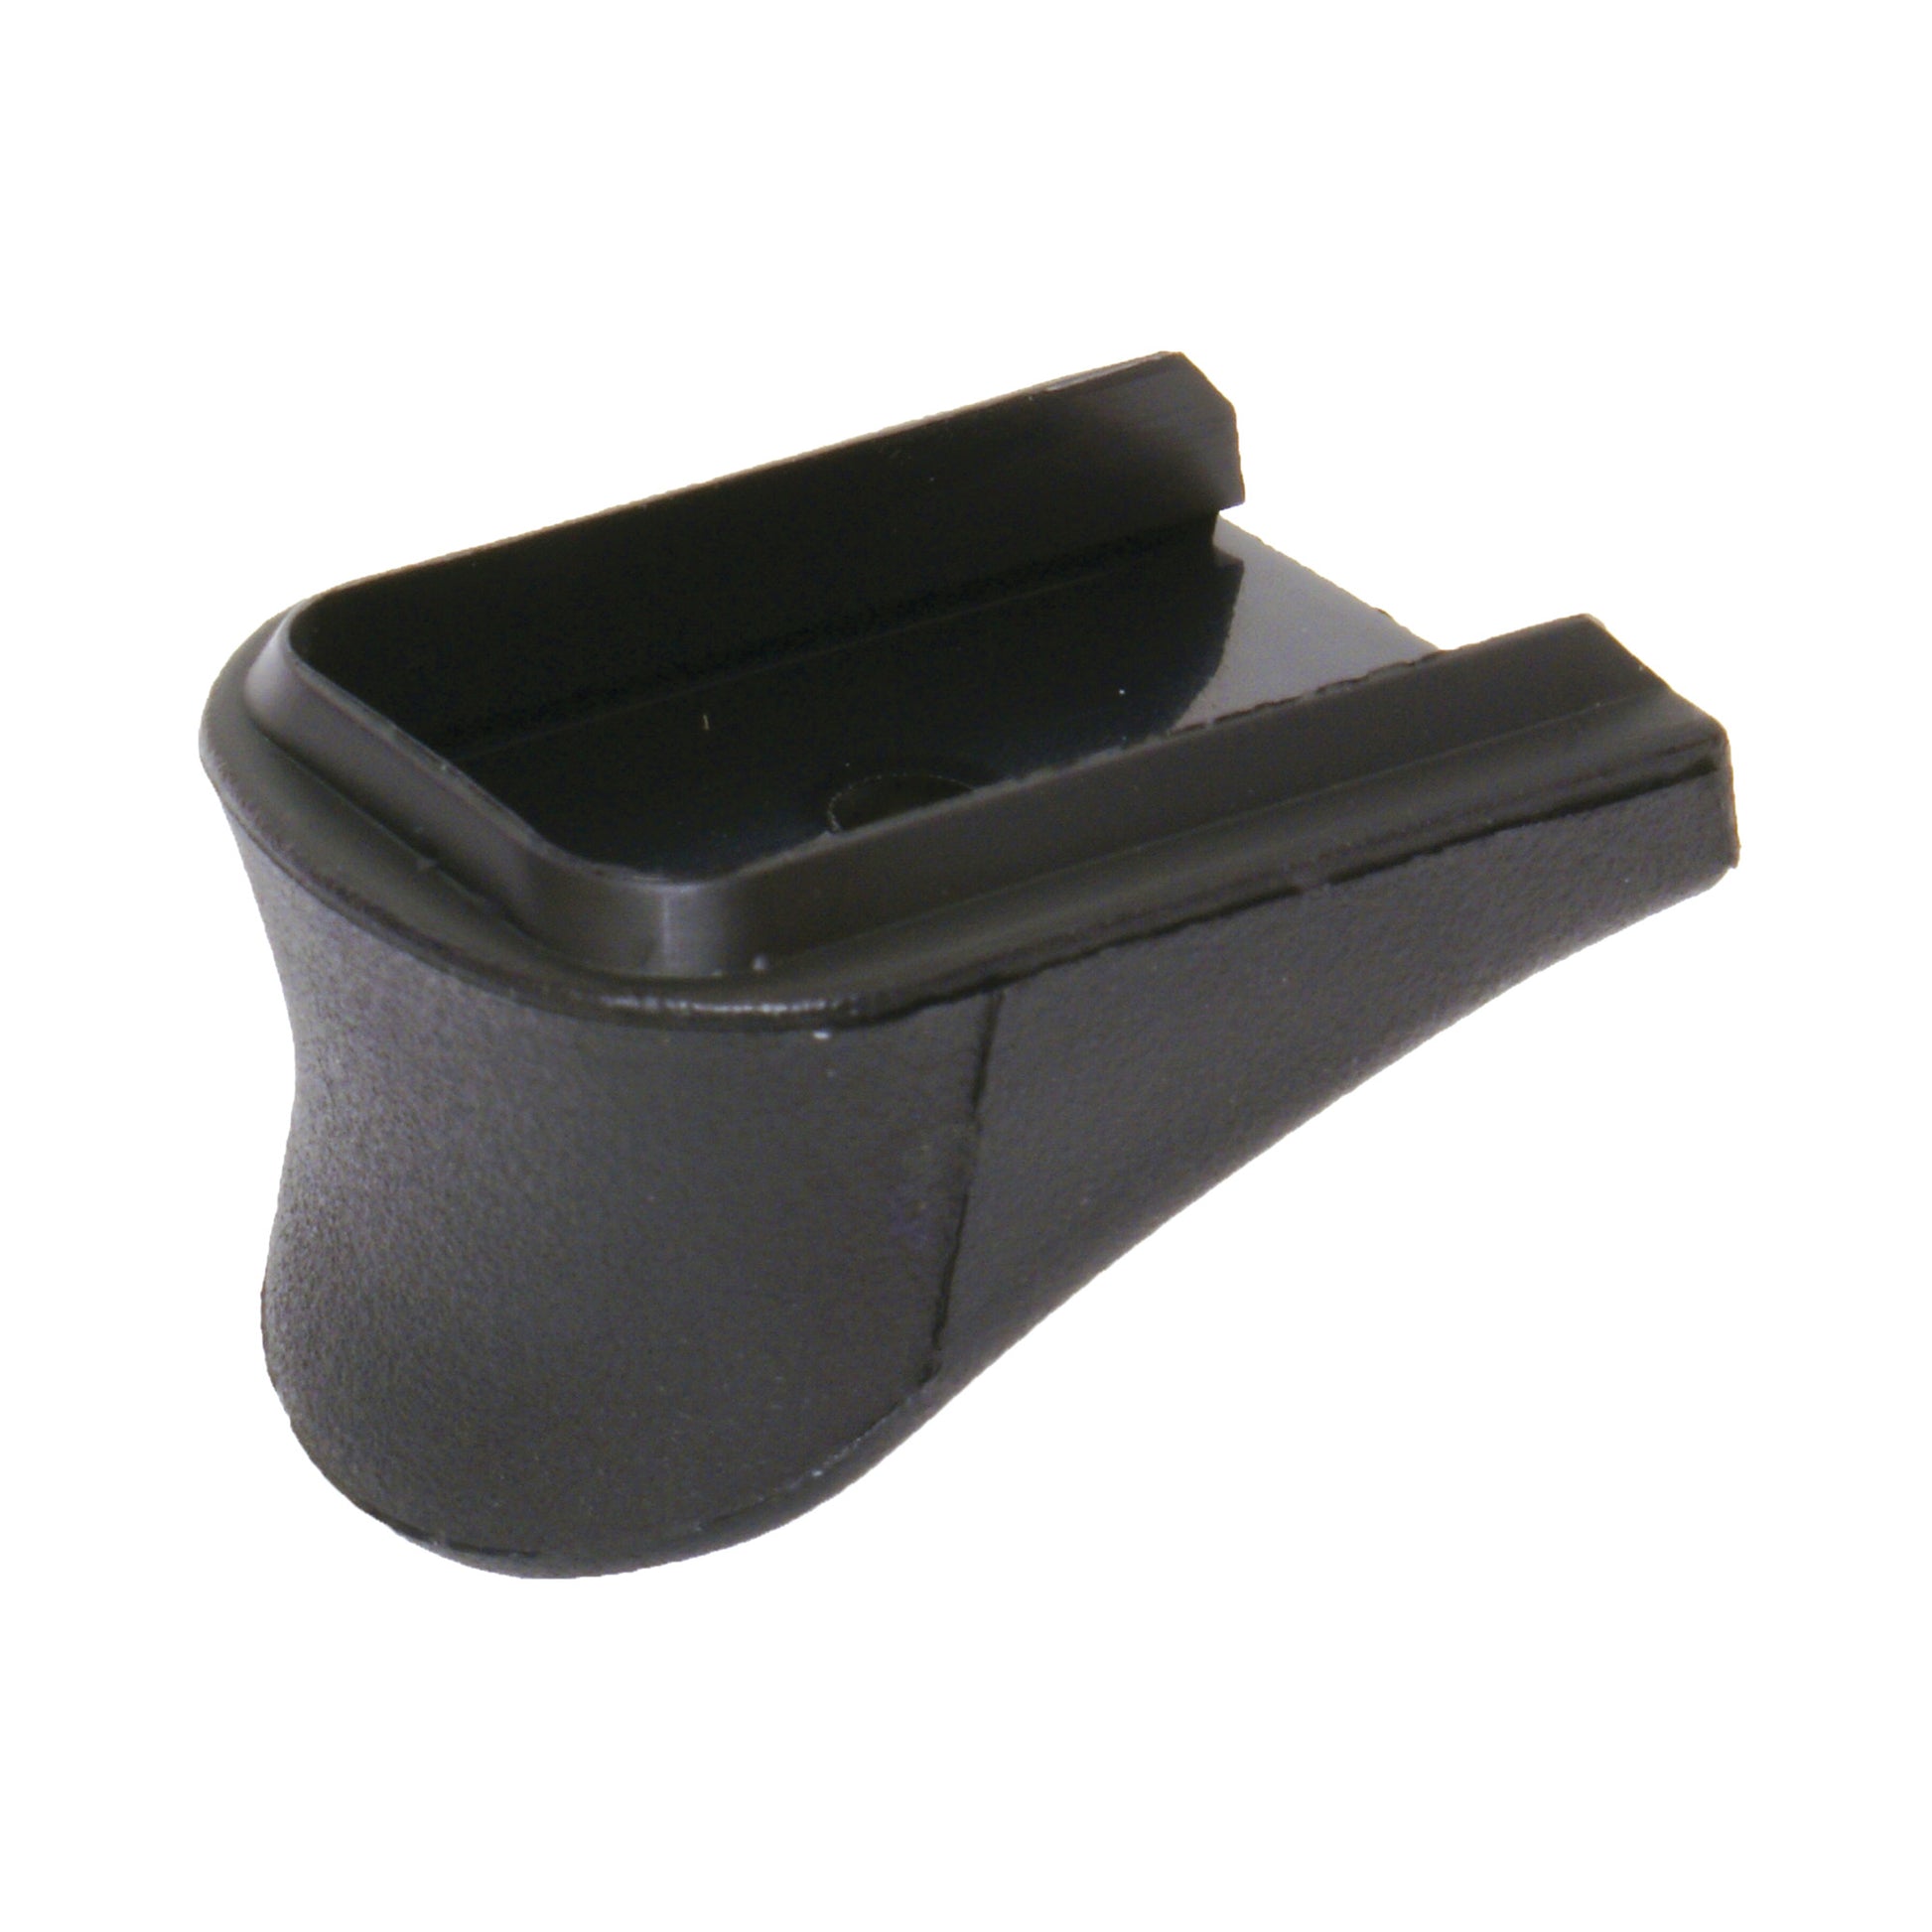 Pearce Grip Extension Extra Gripping Surface Fits XD Compact Black PGXD - California Shooting Supplies